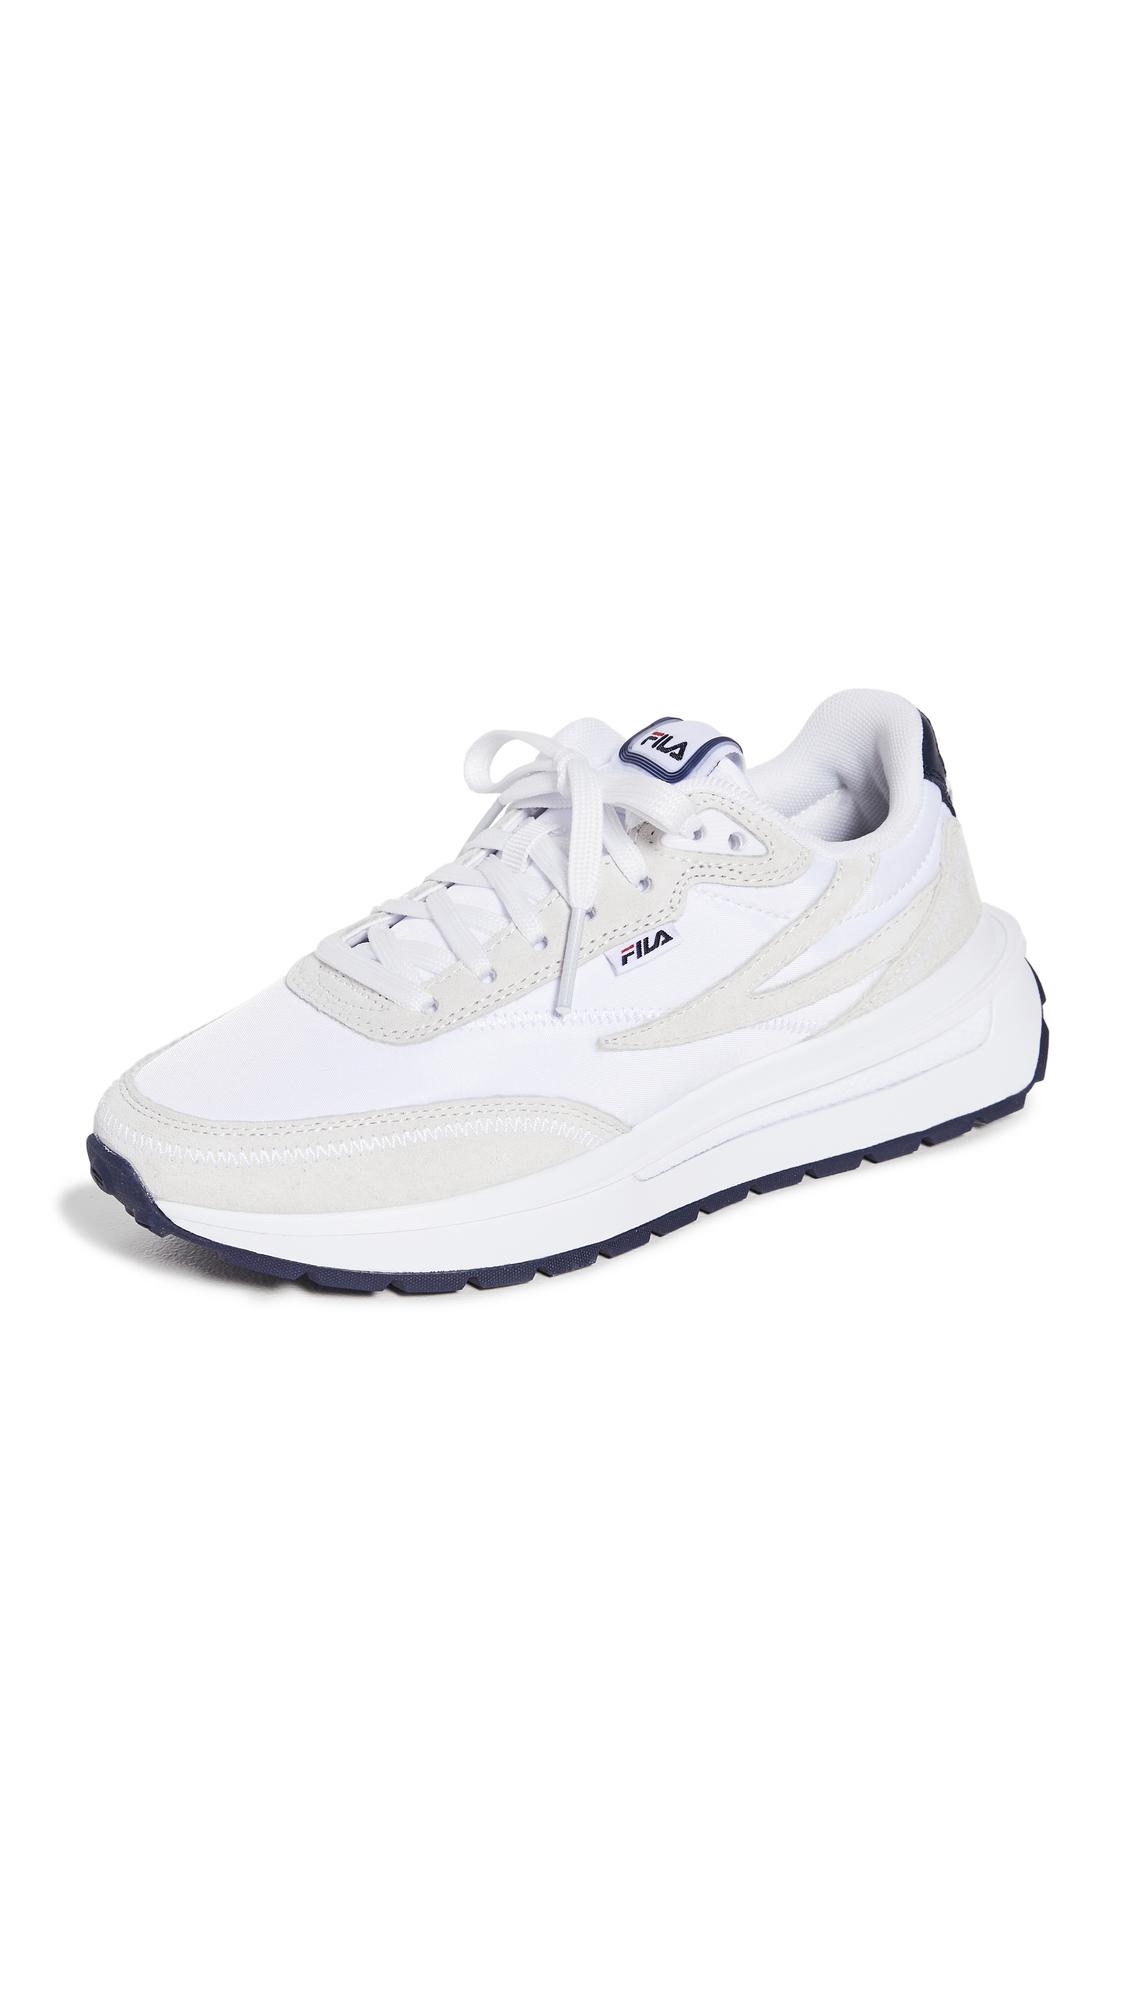 Fila Leather Renno Sneakers in White - Lyst